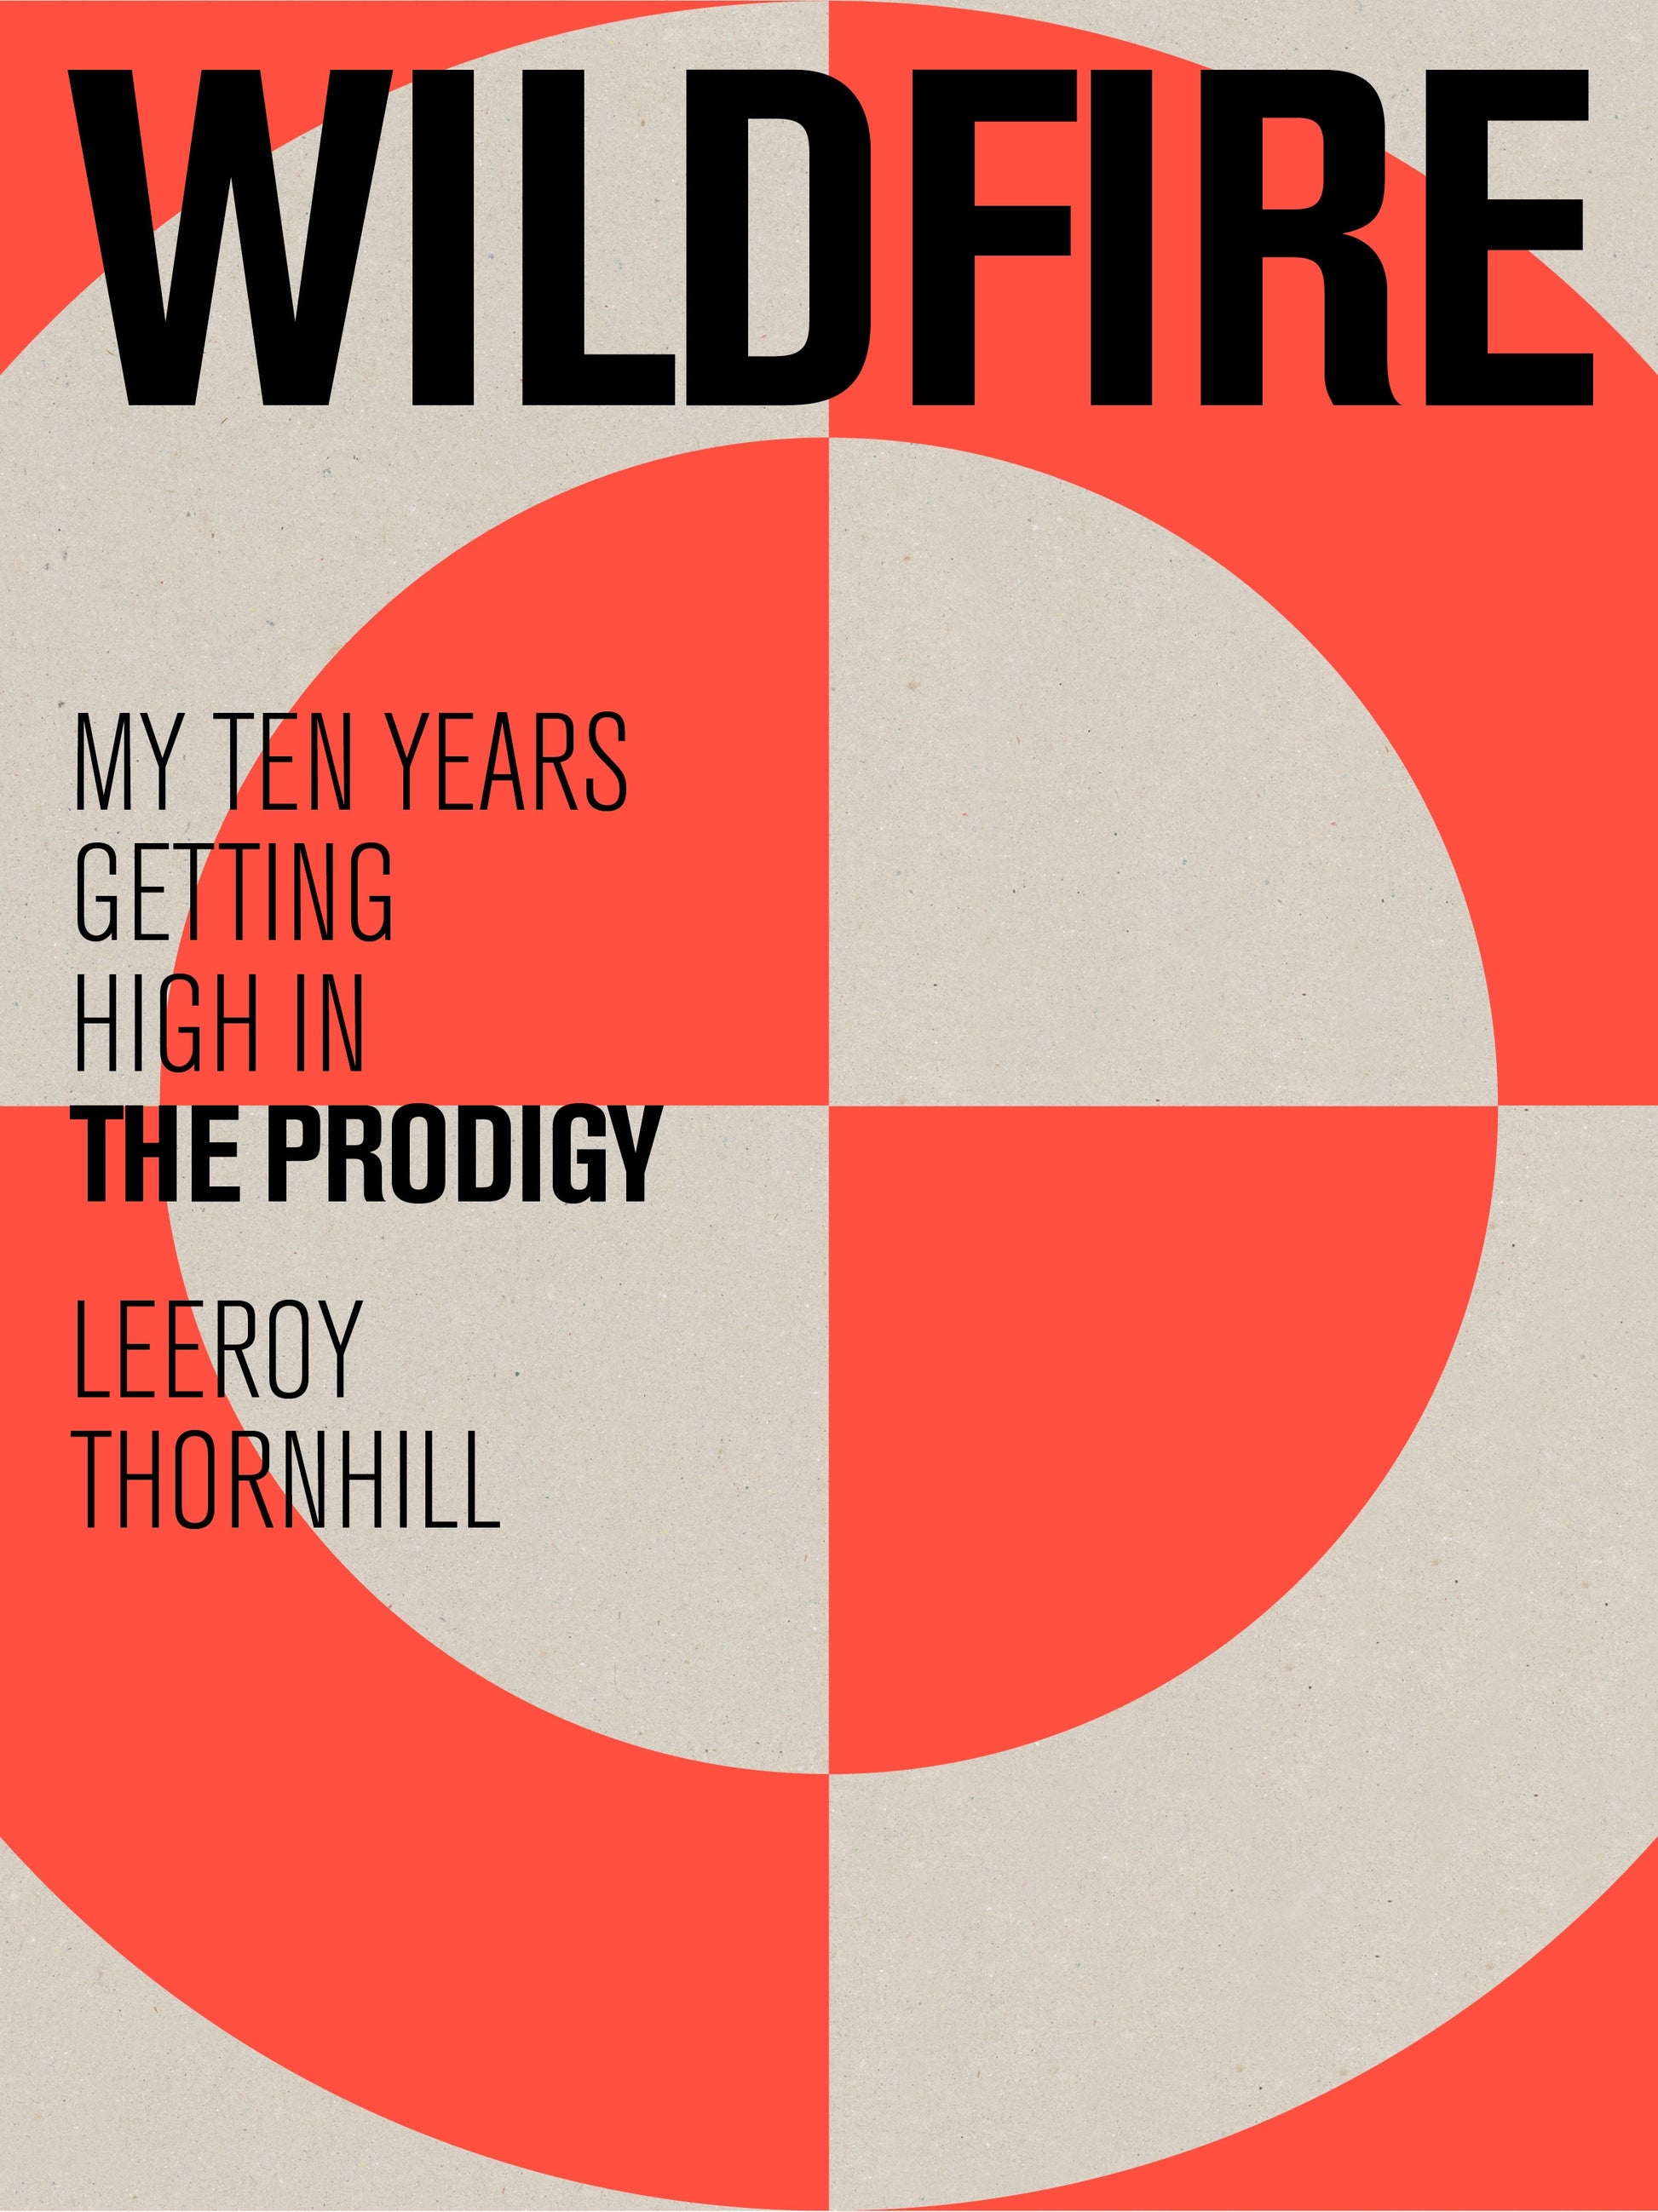 Wildfire by Leeroy Thornhill